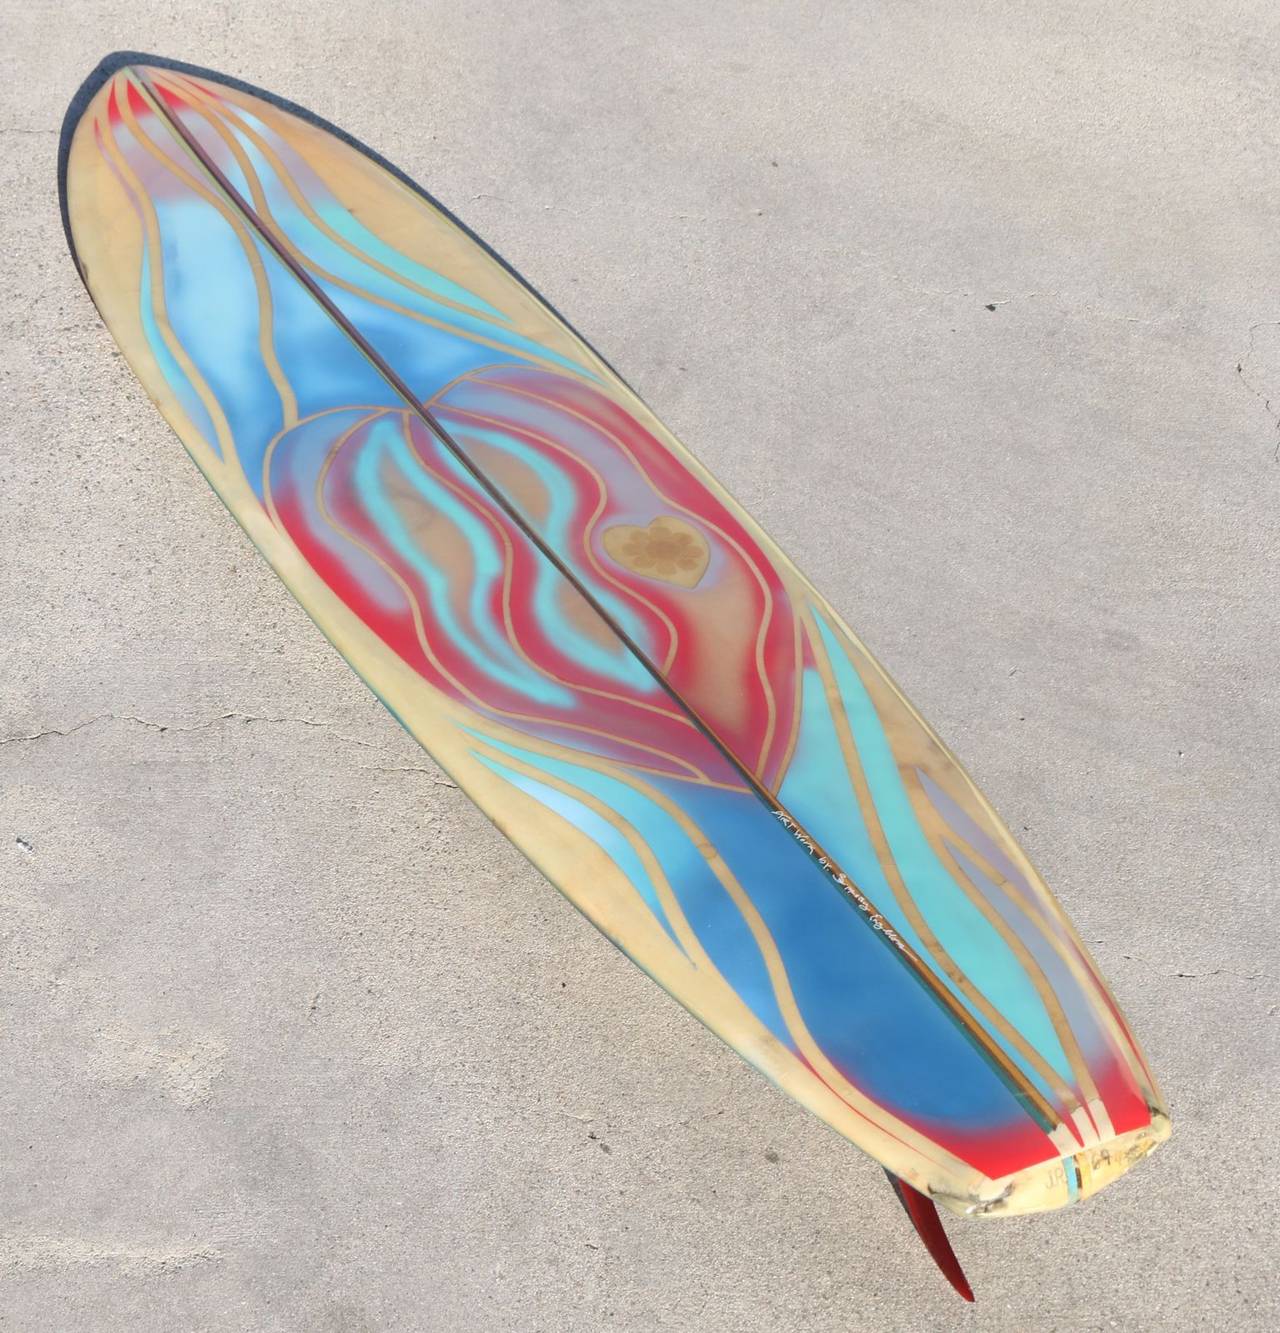 Skip Engblom Surfboard, Two-Sided Art by the Dogtown Z-Boys, Zephyr Founder In Good Condition For Sale In Los Angeles, CA